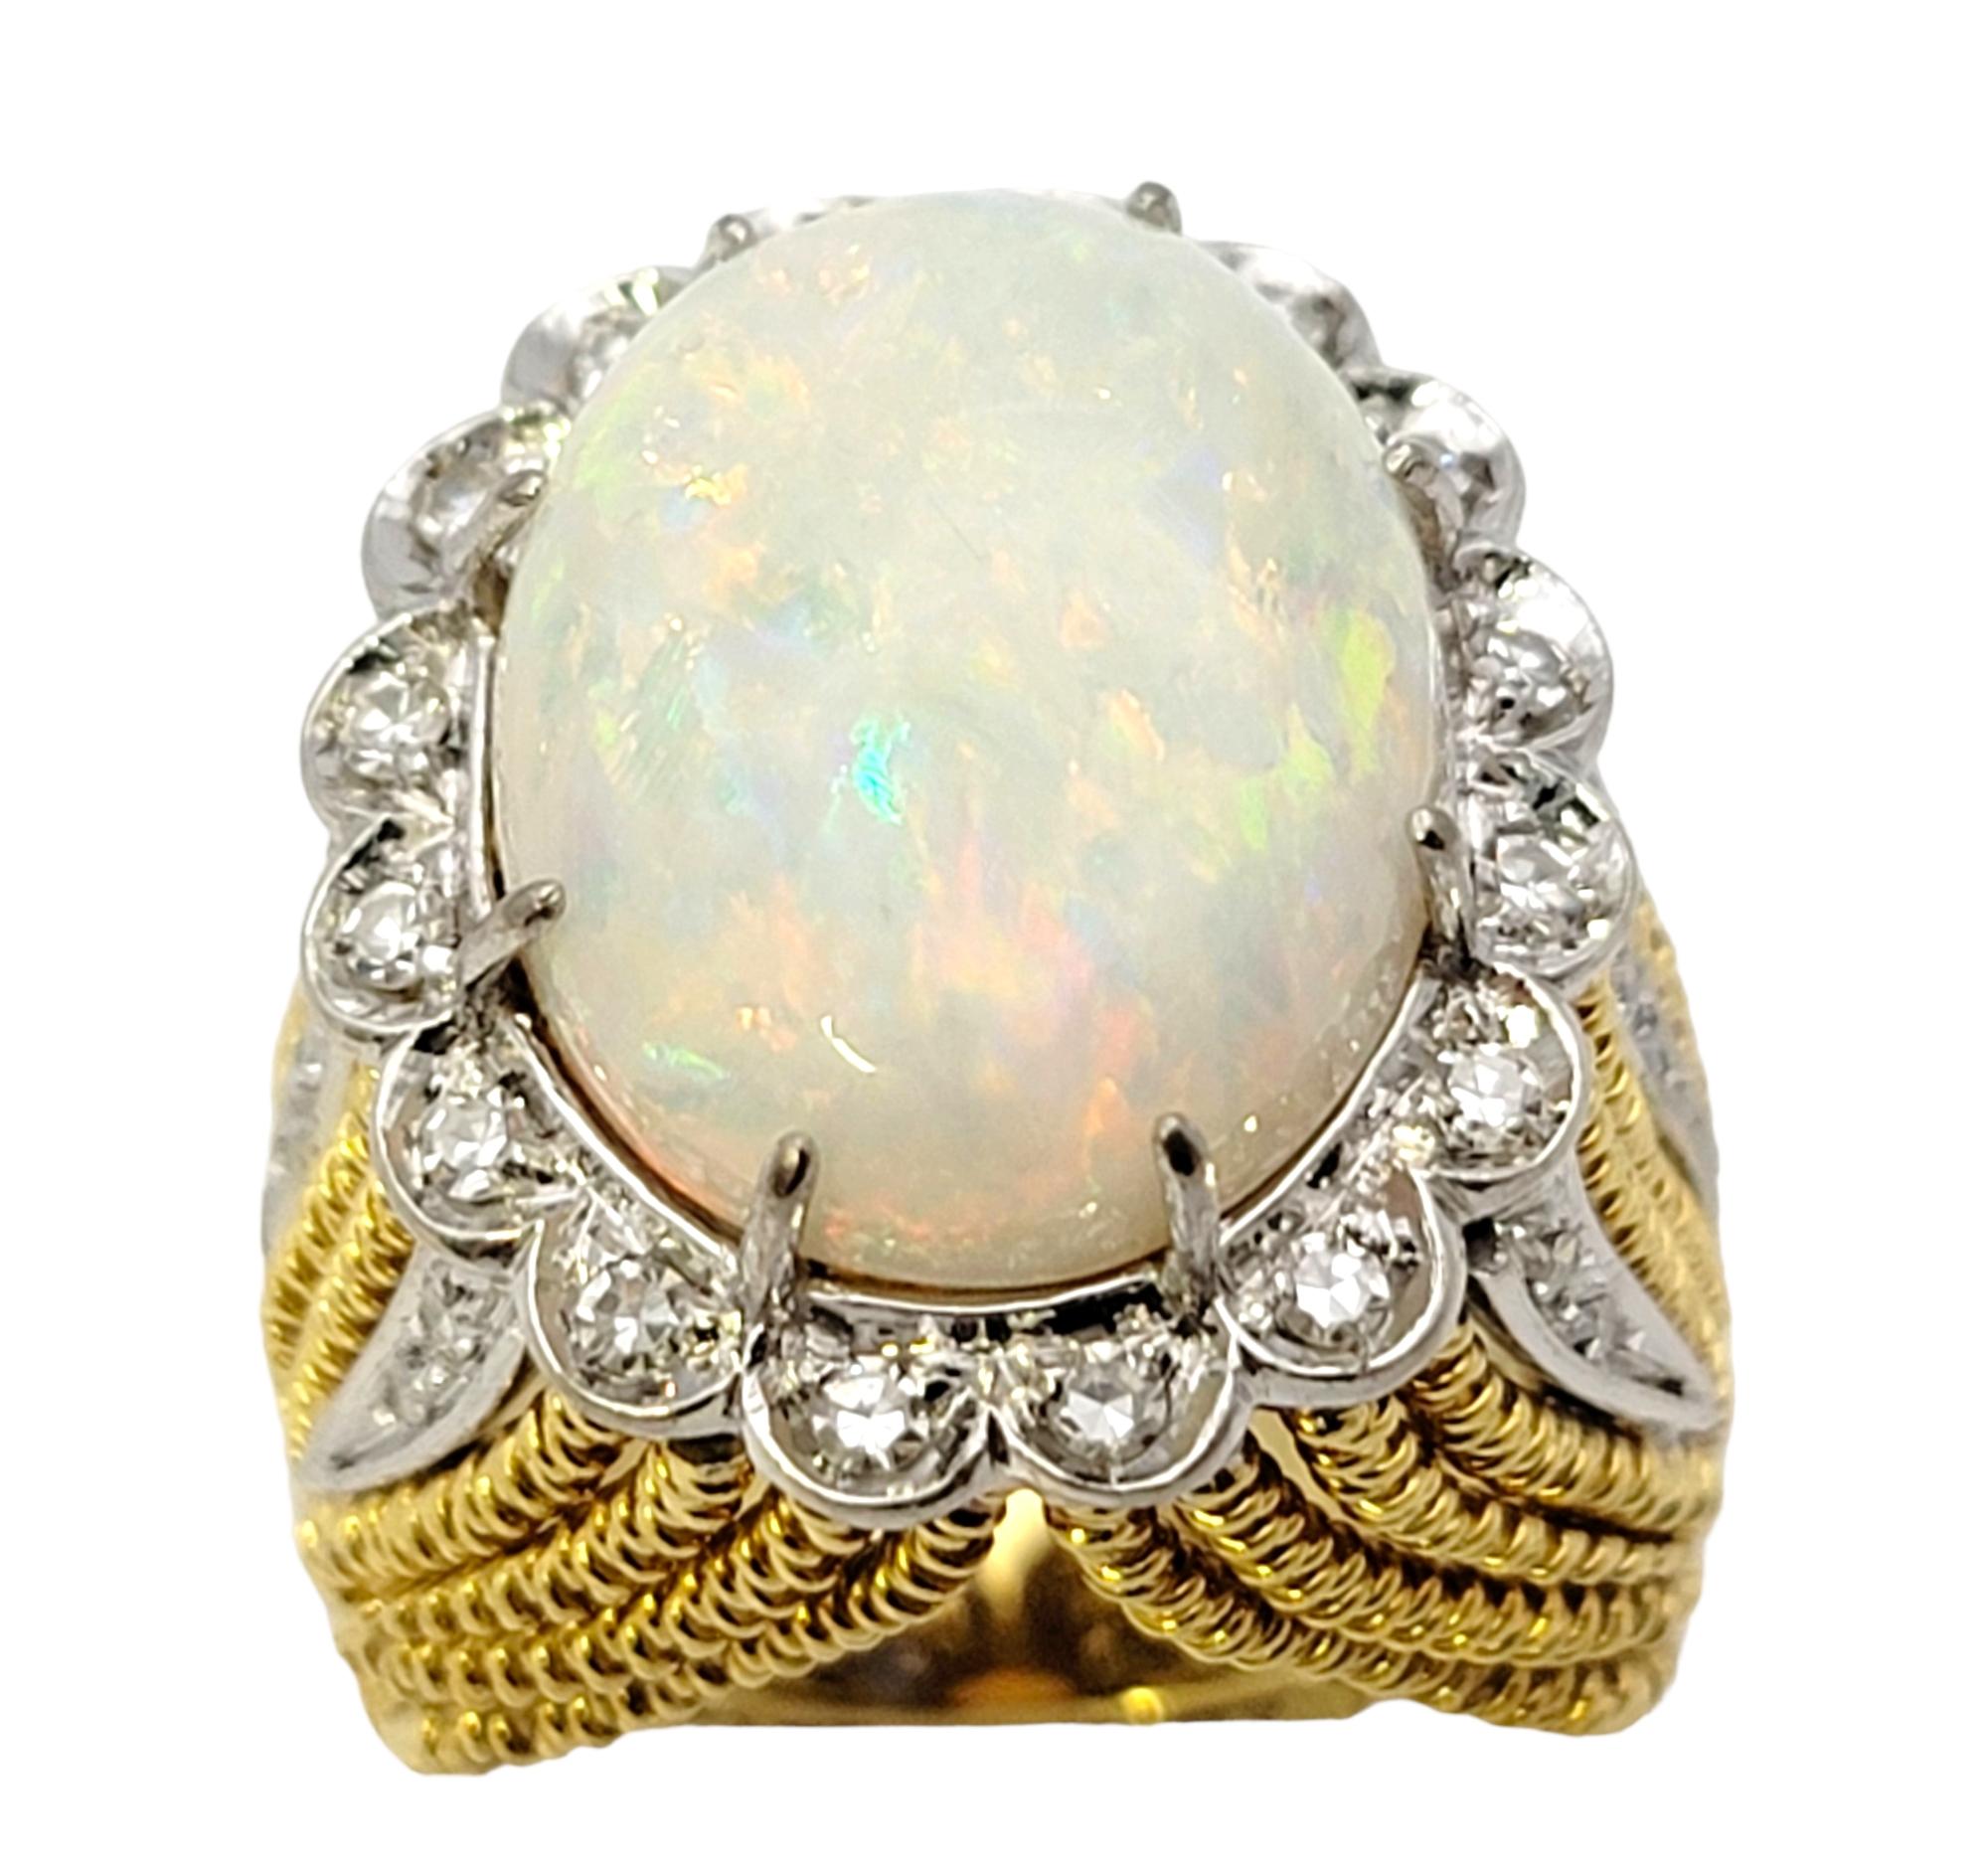 Ring size: 4.5

This huge, high profile opal and diamond cocktail ring makes an incredible statement piece. Substantial in both size and sparkle, this unique piece will absolutely WOW.

This marvellous ring features a single cabochon oval shaped